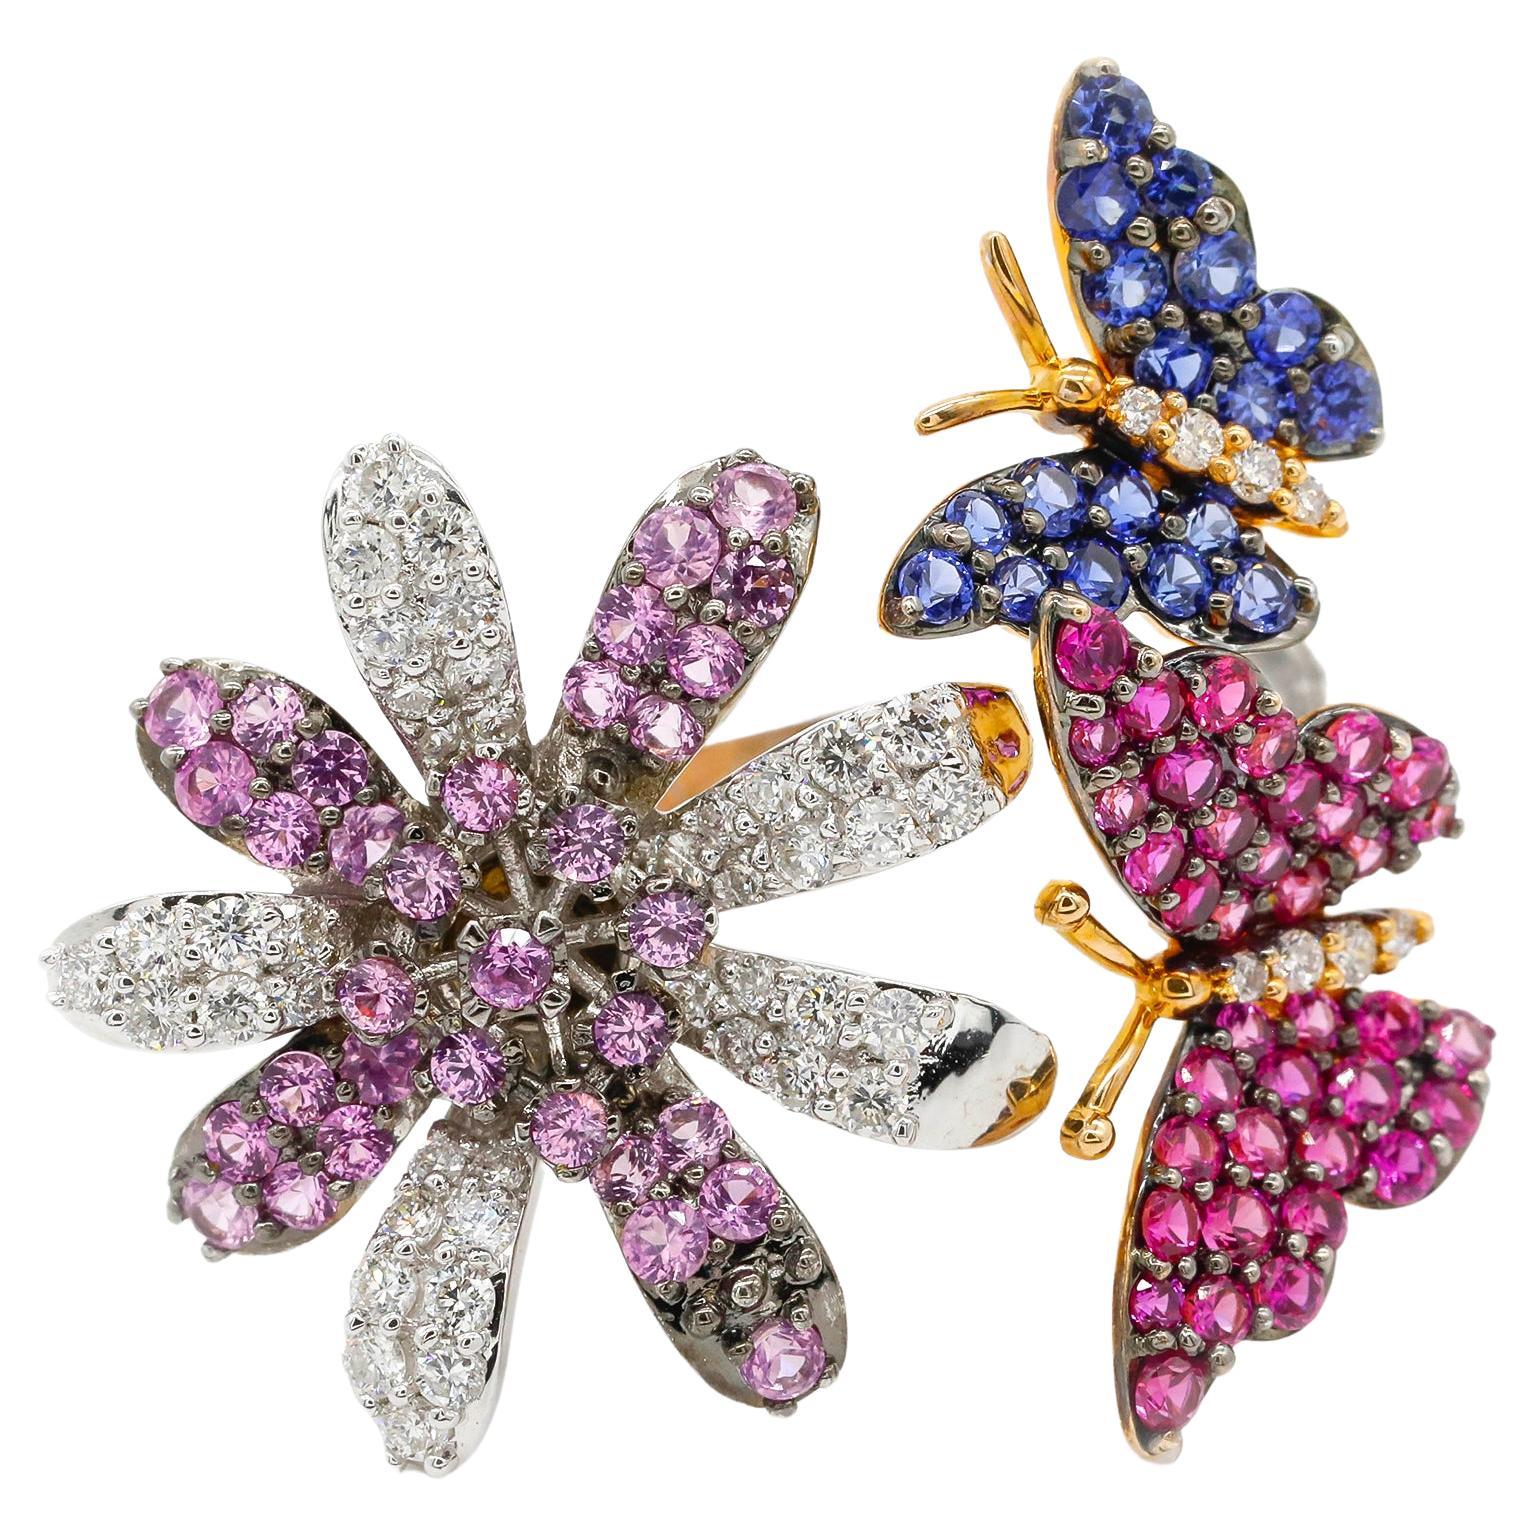 2.18 Ct Pink Sapphire Ruby Diamond Pave 14k Yellow Gold Flower Butterfly Ring

This modern ring features a total of 0.60 carats of diamond round shape and Ruby, Blue Sapphire and Pink Sapphire Gemstone Set in 14K Yellow Gold.

We guarantee all